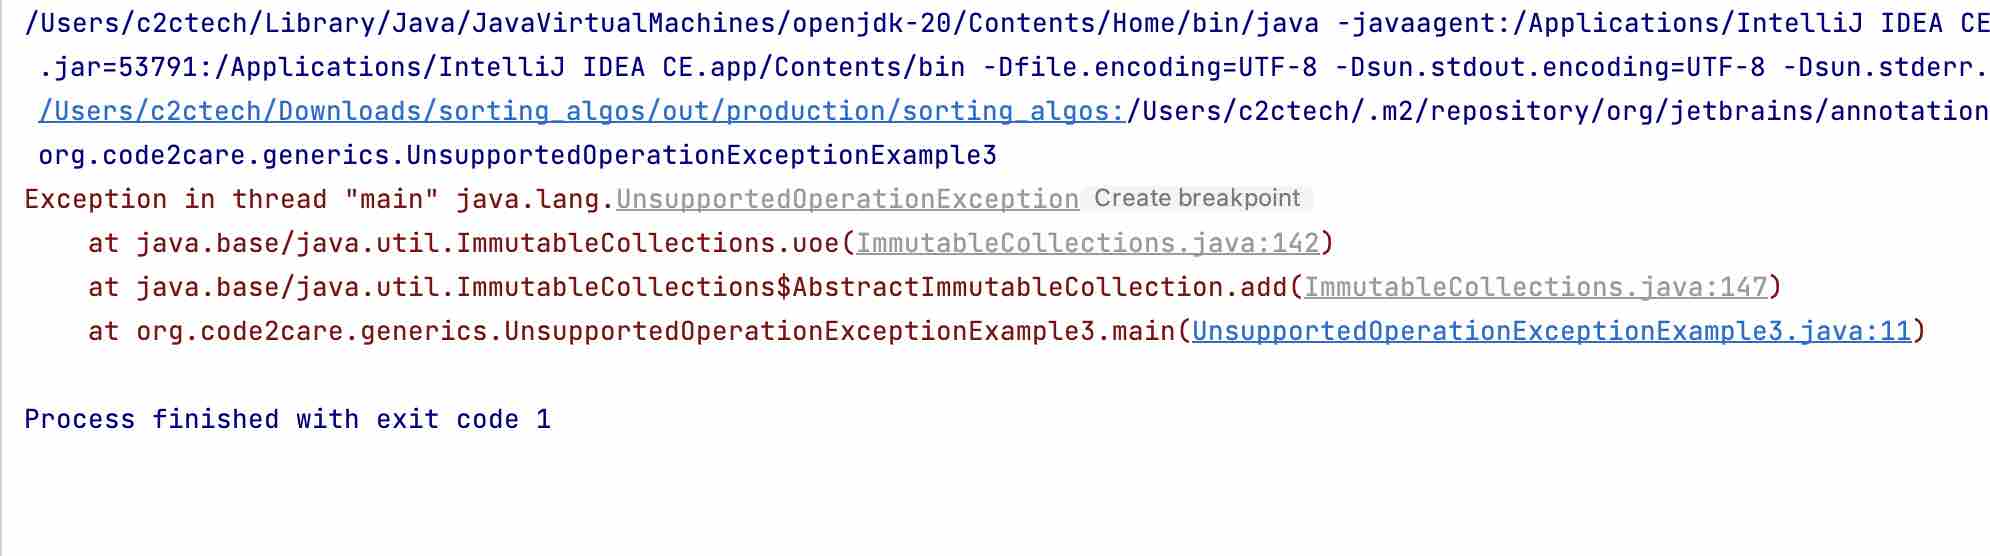 java.lang.UnsupportedOperationException